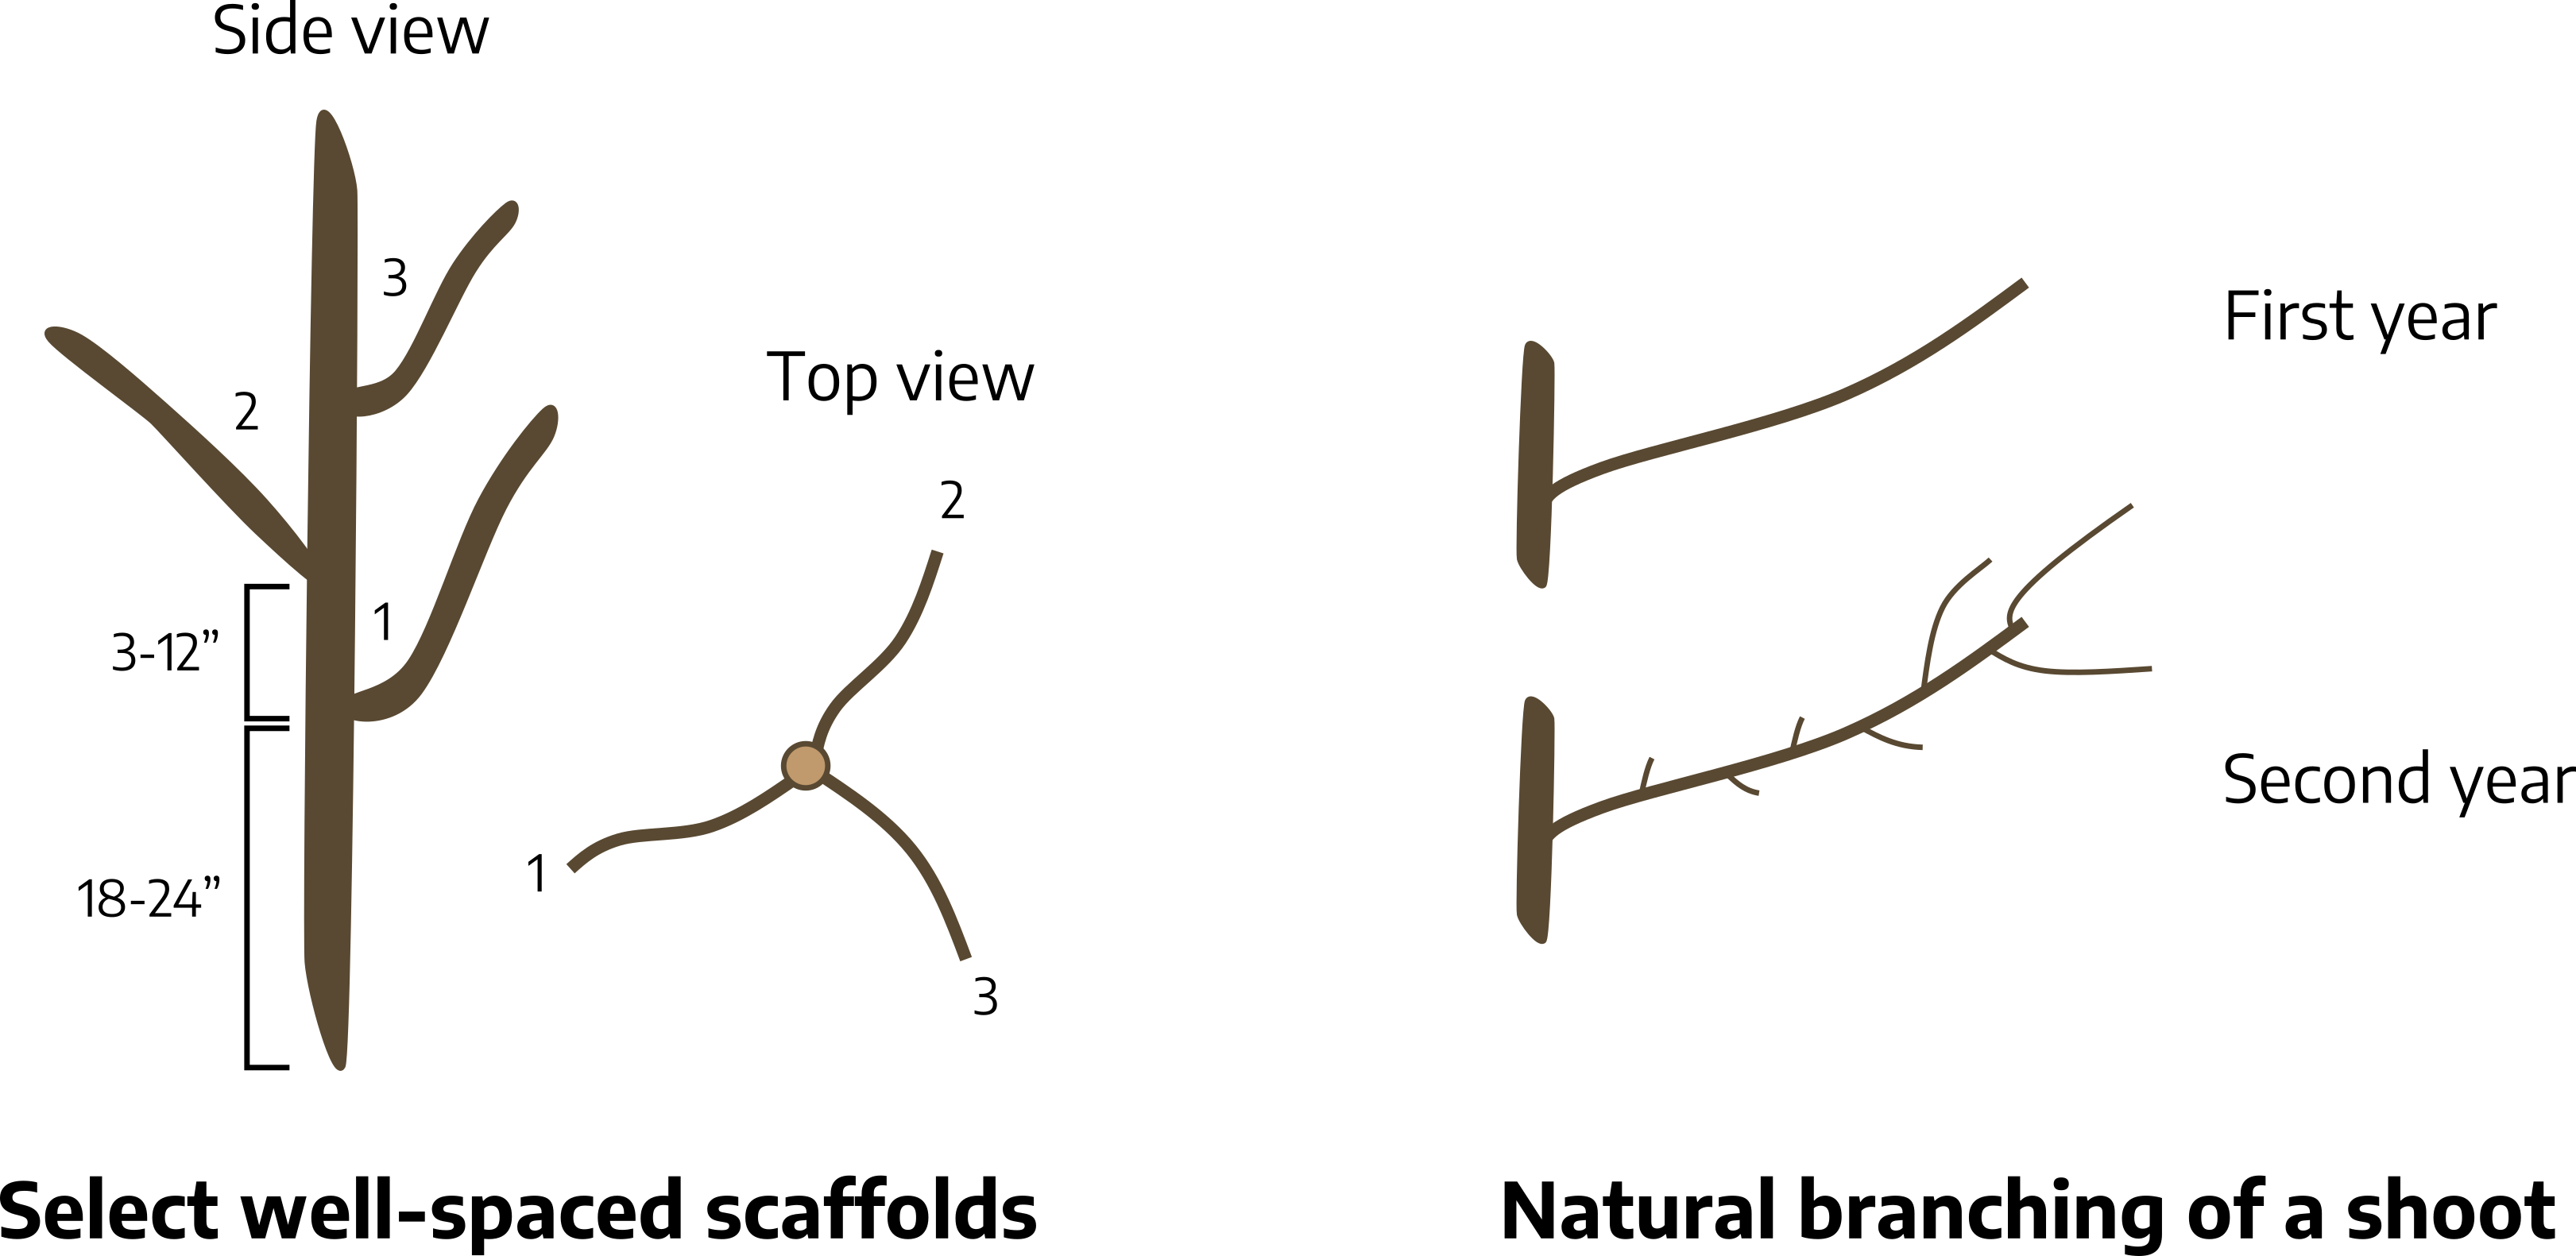 Two cartoon drawings of branch sections. The first is labeled "select well-spaced scaffolds", is a main stem with three alternating smaller branches; between the base and the first branch is a measure of 18-24 inches, between the first branch and second branch is a measurement of 3-12 inches, labeled as "side view"; there is also a birds-eye view of the drawing labeled "top view", a main branch with three smaller branches growing evenly around the main branch. The second drawing is labeled, "natural branching of a shoot", a section of the main branch has a smaller branch growing at a 30 degree angle with no shoots marked "first year"; the lower drawing has the main branch with a smaller branch growing at a 30 degree angle with smaller offshoots labeled "second year."